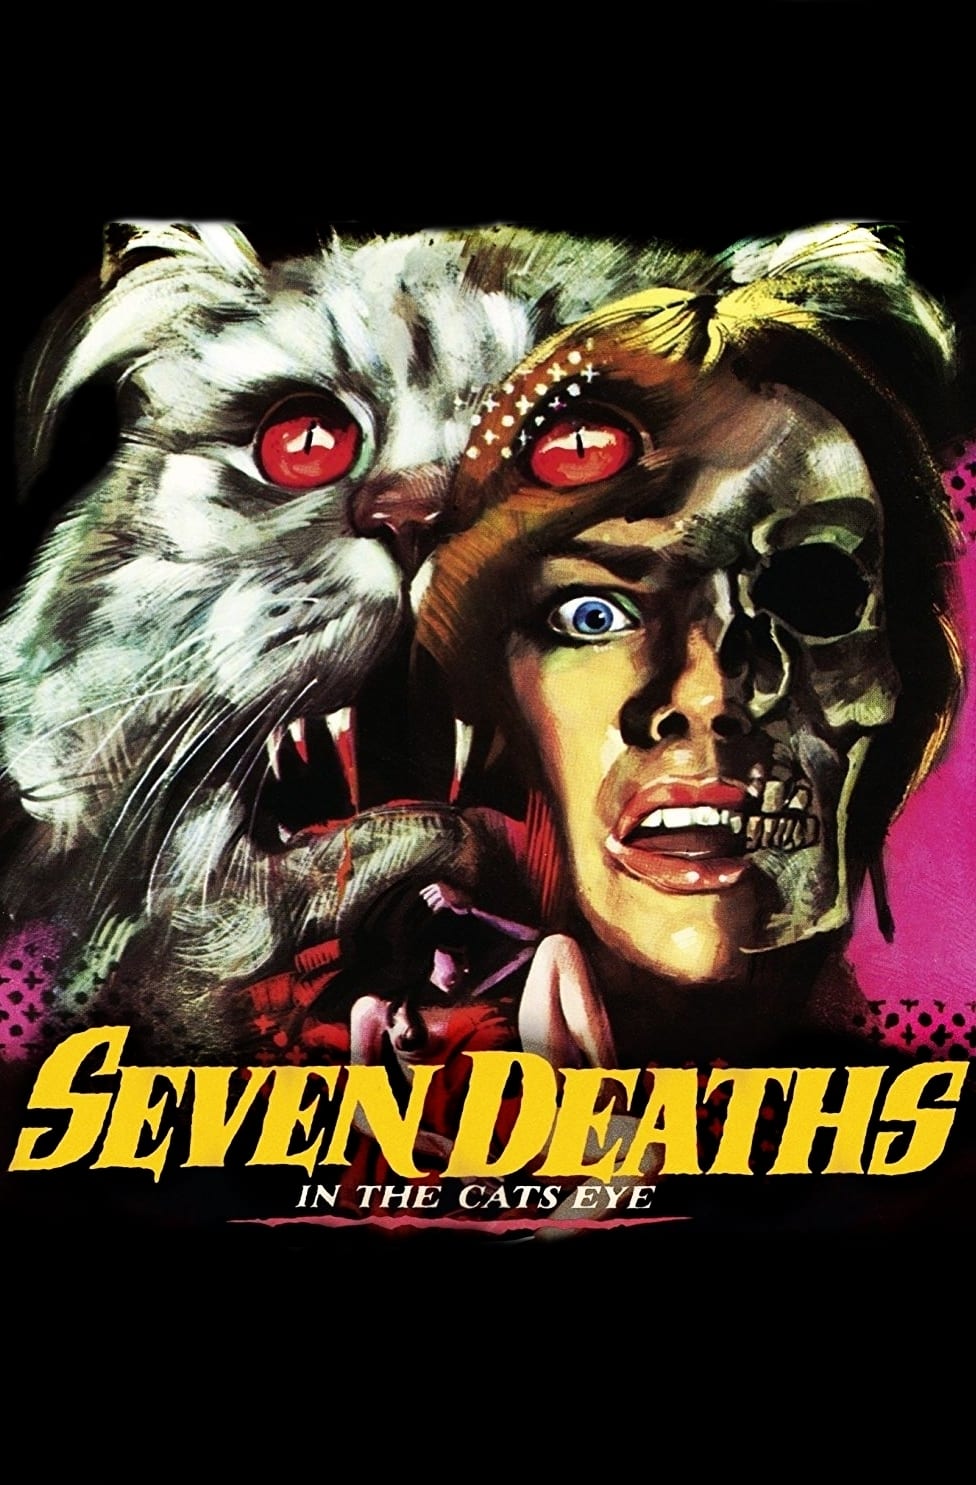 Seven Deaths in the Cat's Eye (1973)